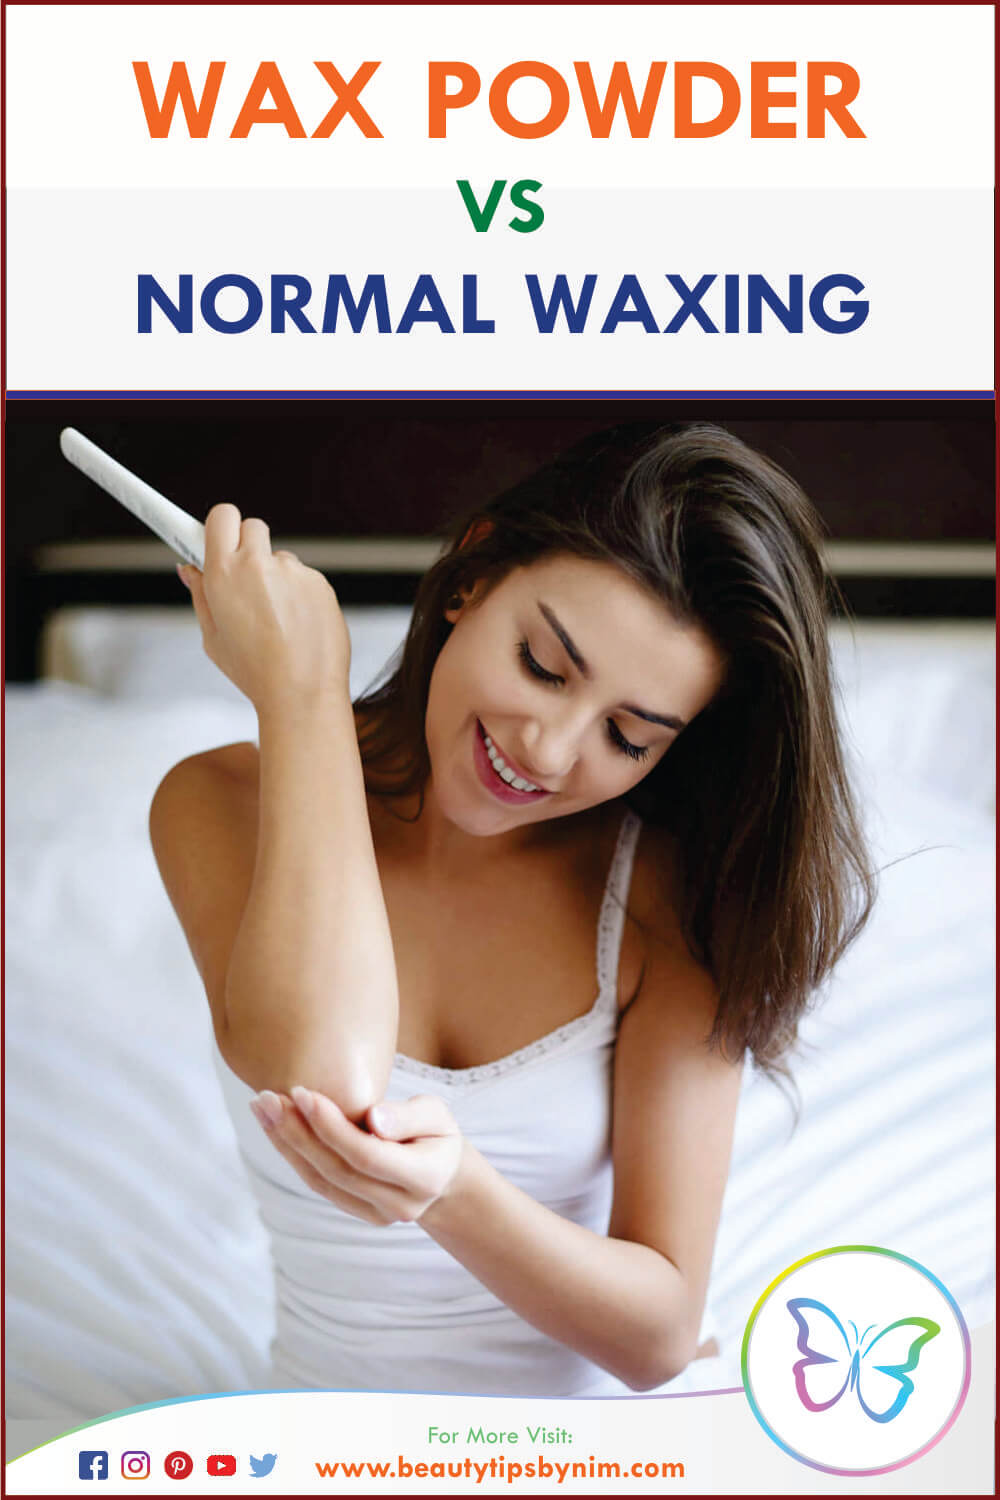 Wax Powder Is Better Than Normal Waxing, Here's Why? Pros and Cons